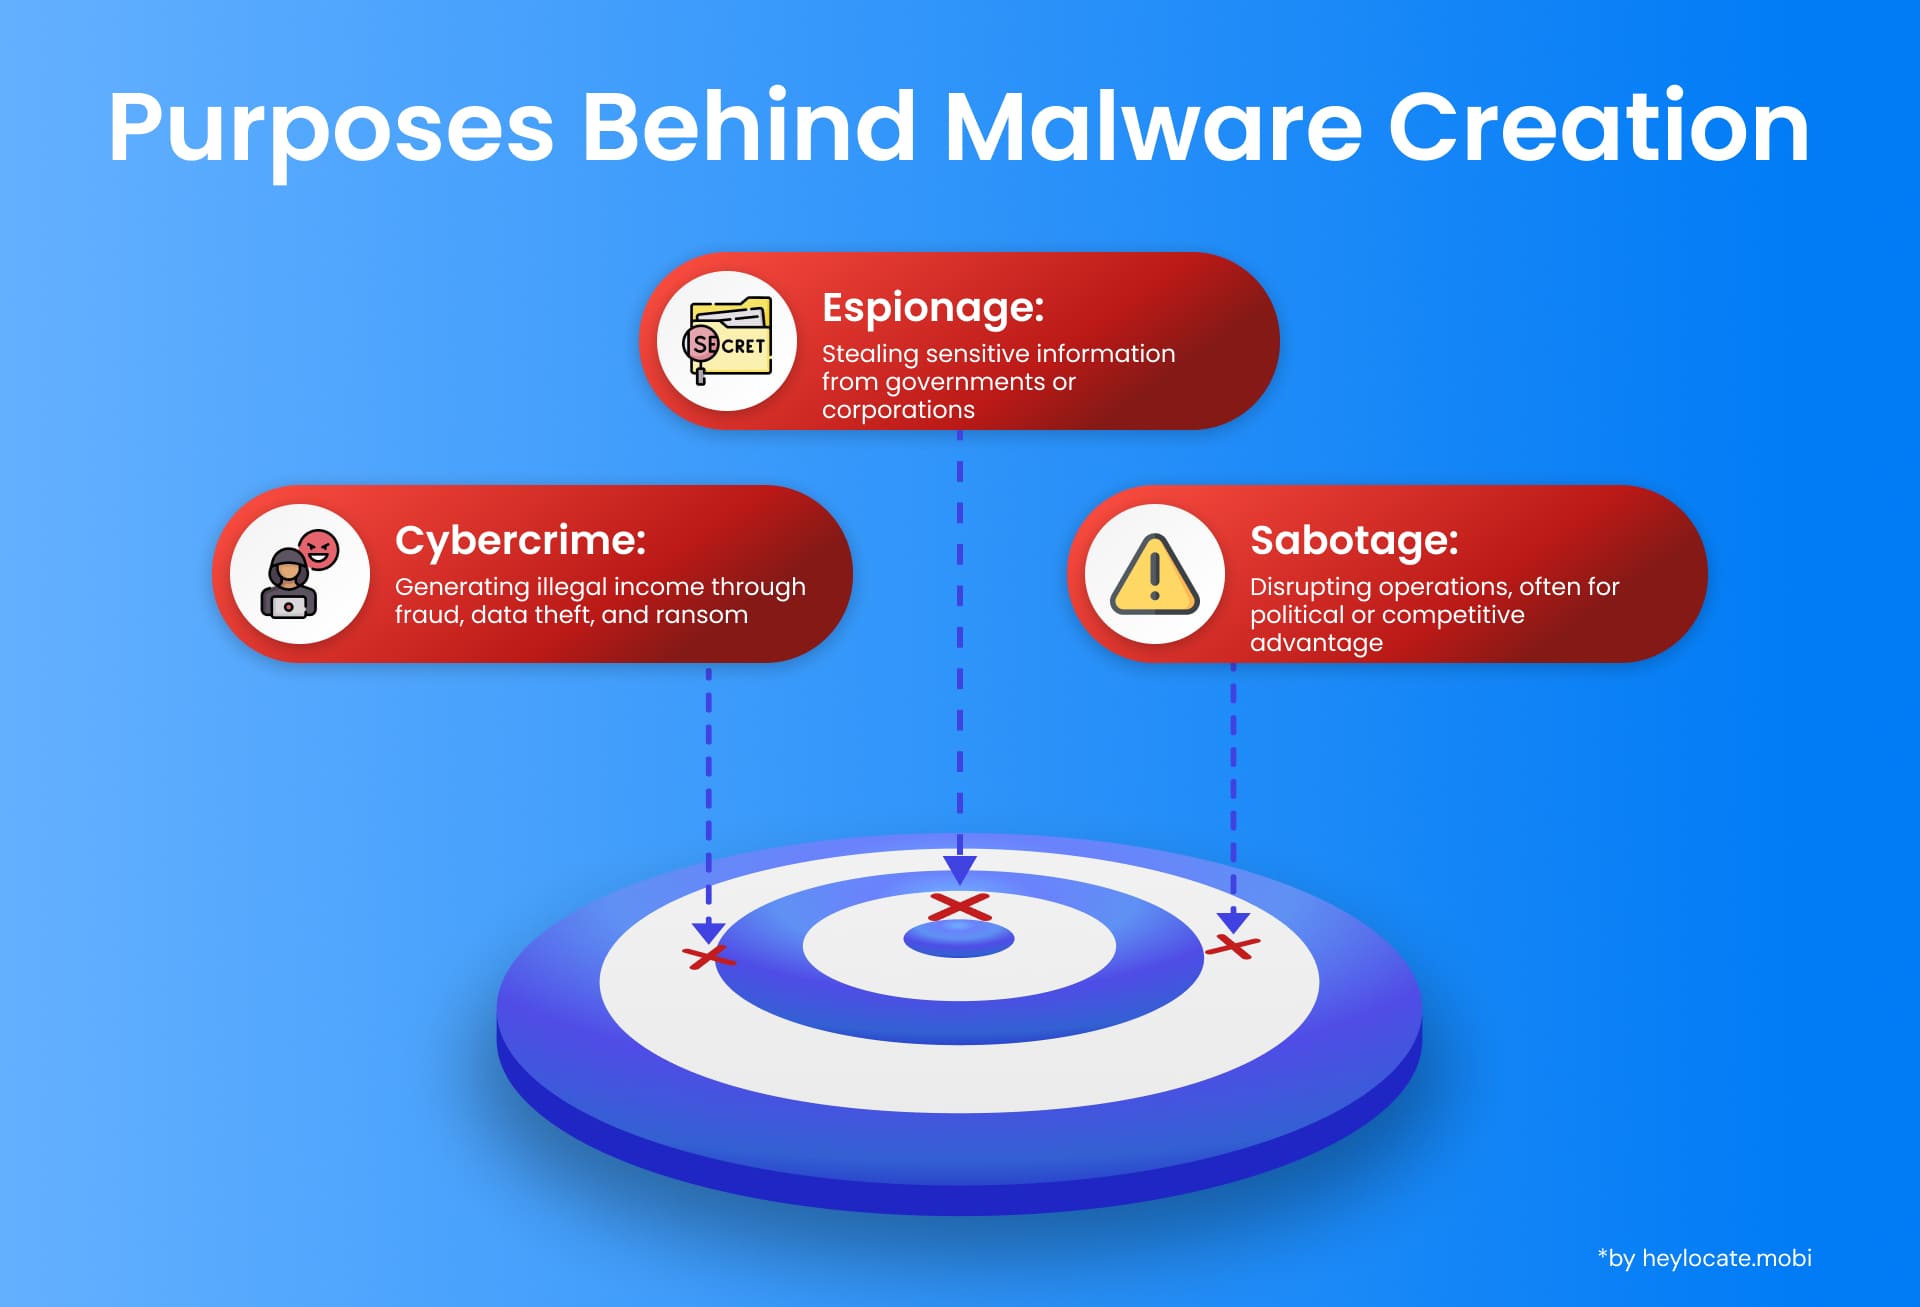 Understanding Malware Motivations: The strategic goals driving the development of malicious software